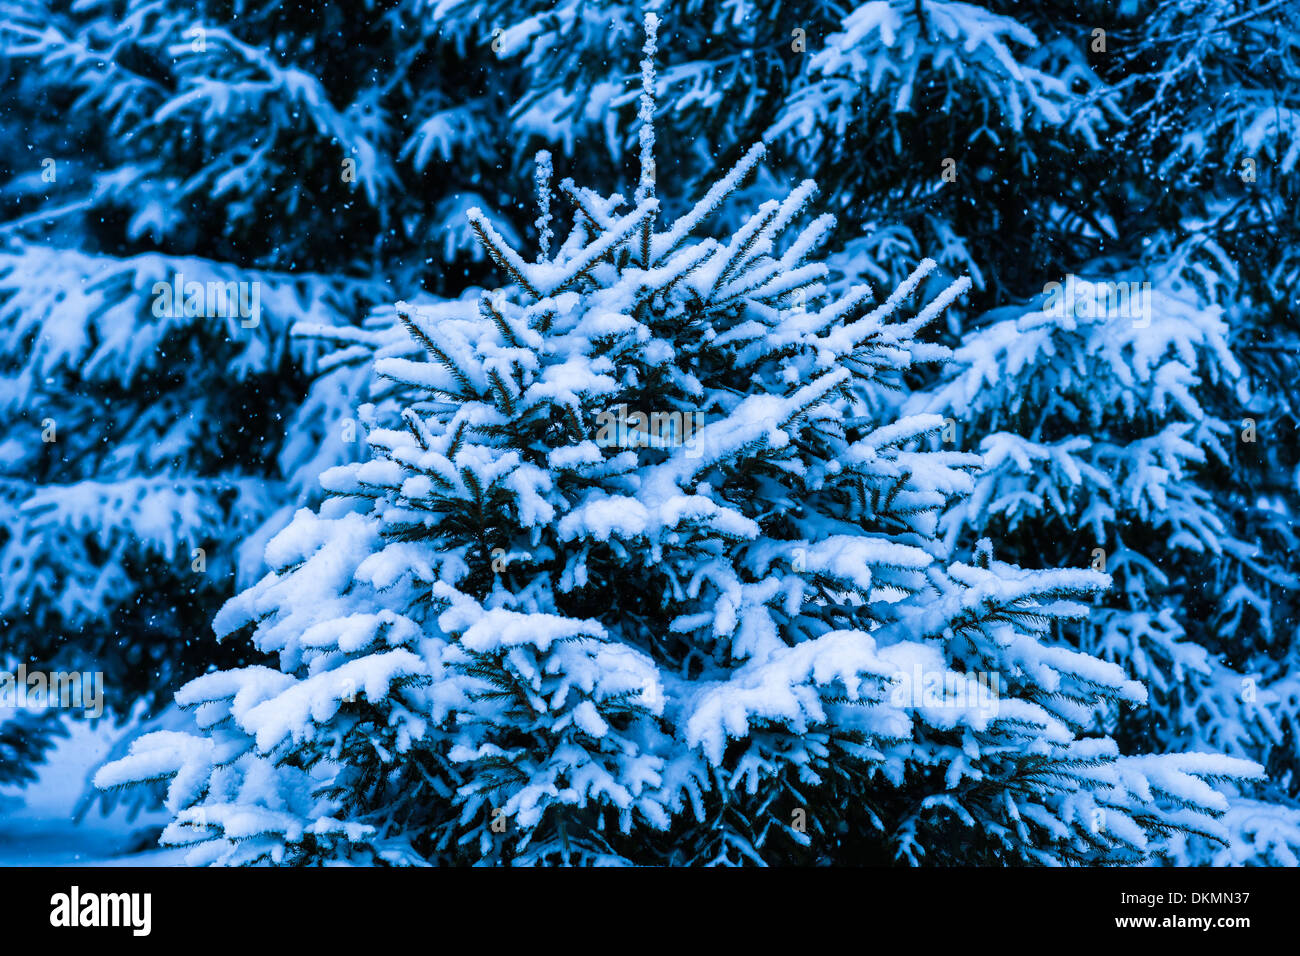 Winter Snow Christmas Tree 8. Fresh snow covered spruce trees in the forest in snowstorm. Dark green, blue and white colors. Stock Photo